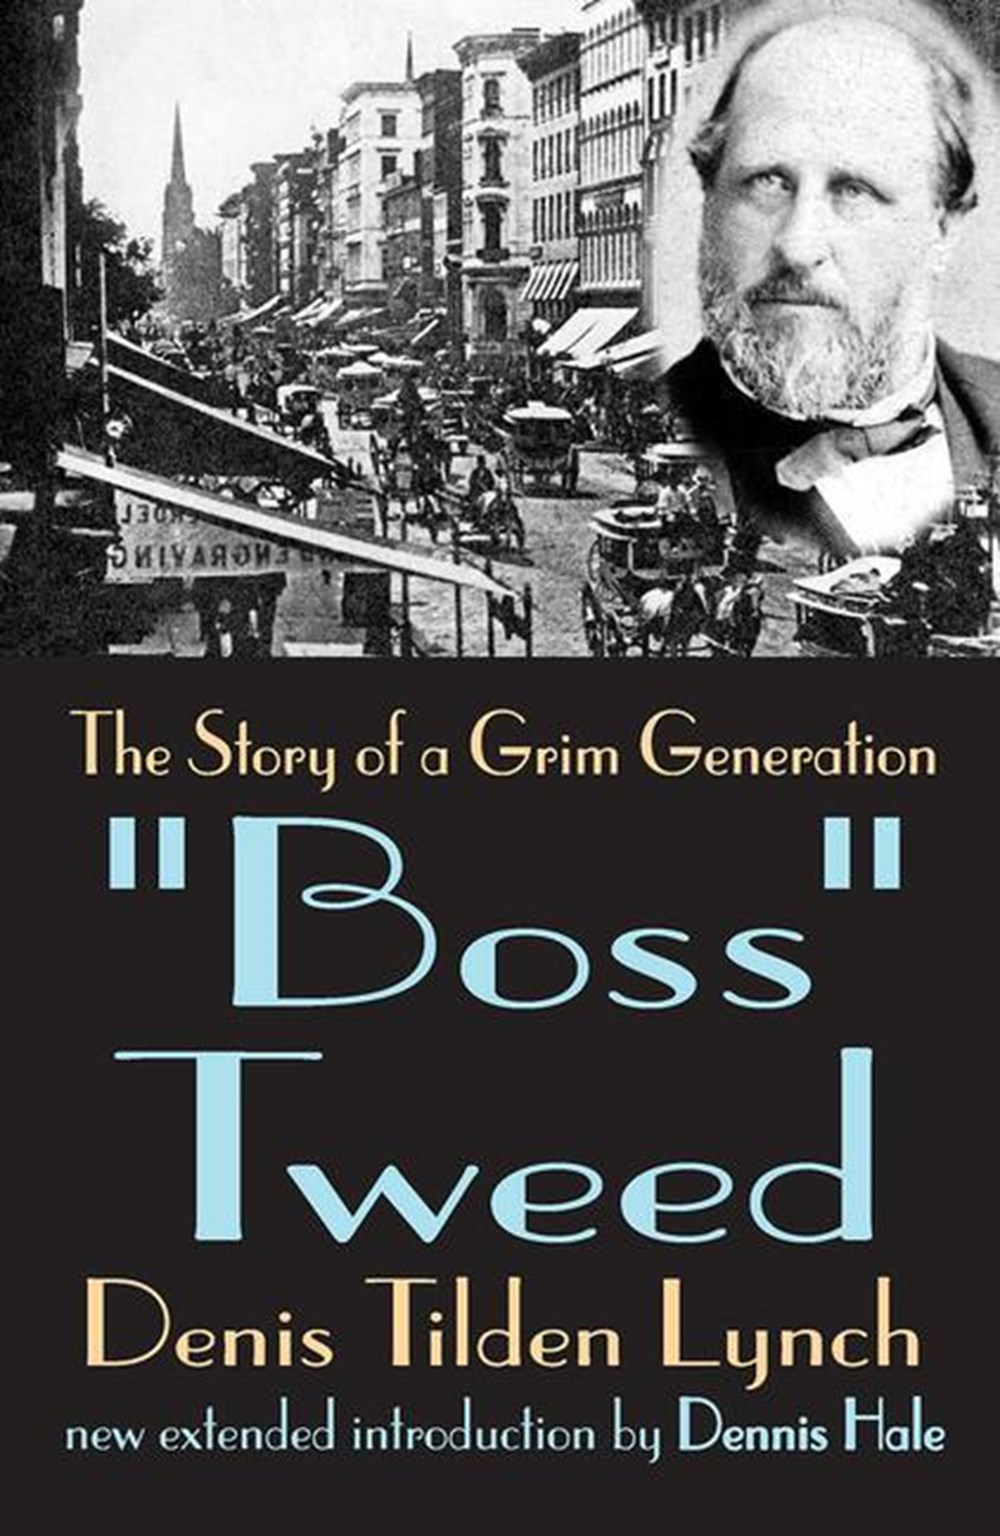 Boss Tweed The Story of a Grim Generation